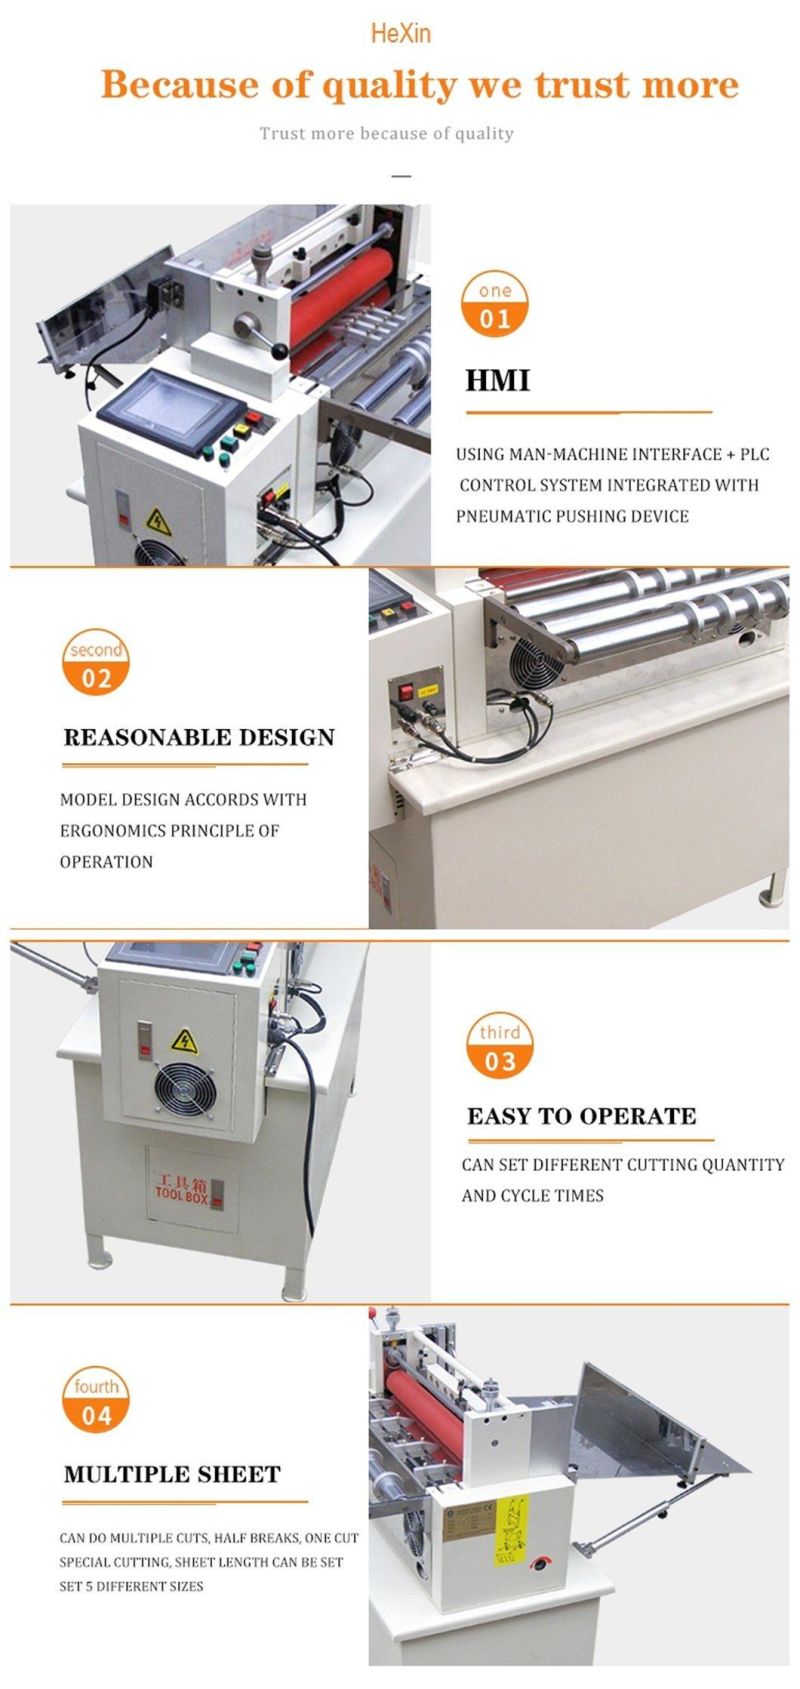 Stain Label Trademark Cutting Machine for Good Quality Price